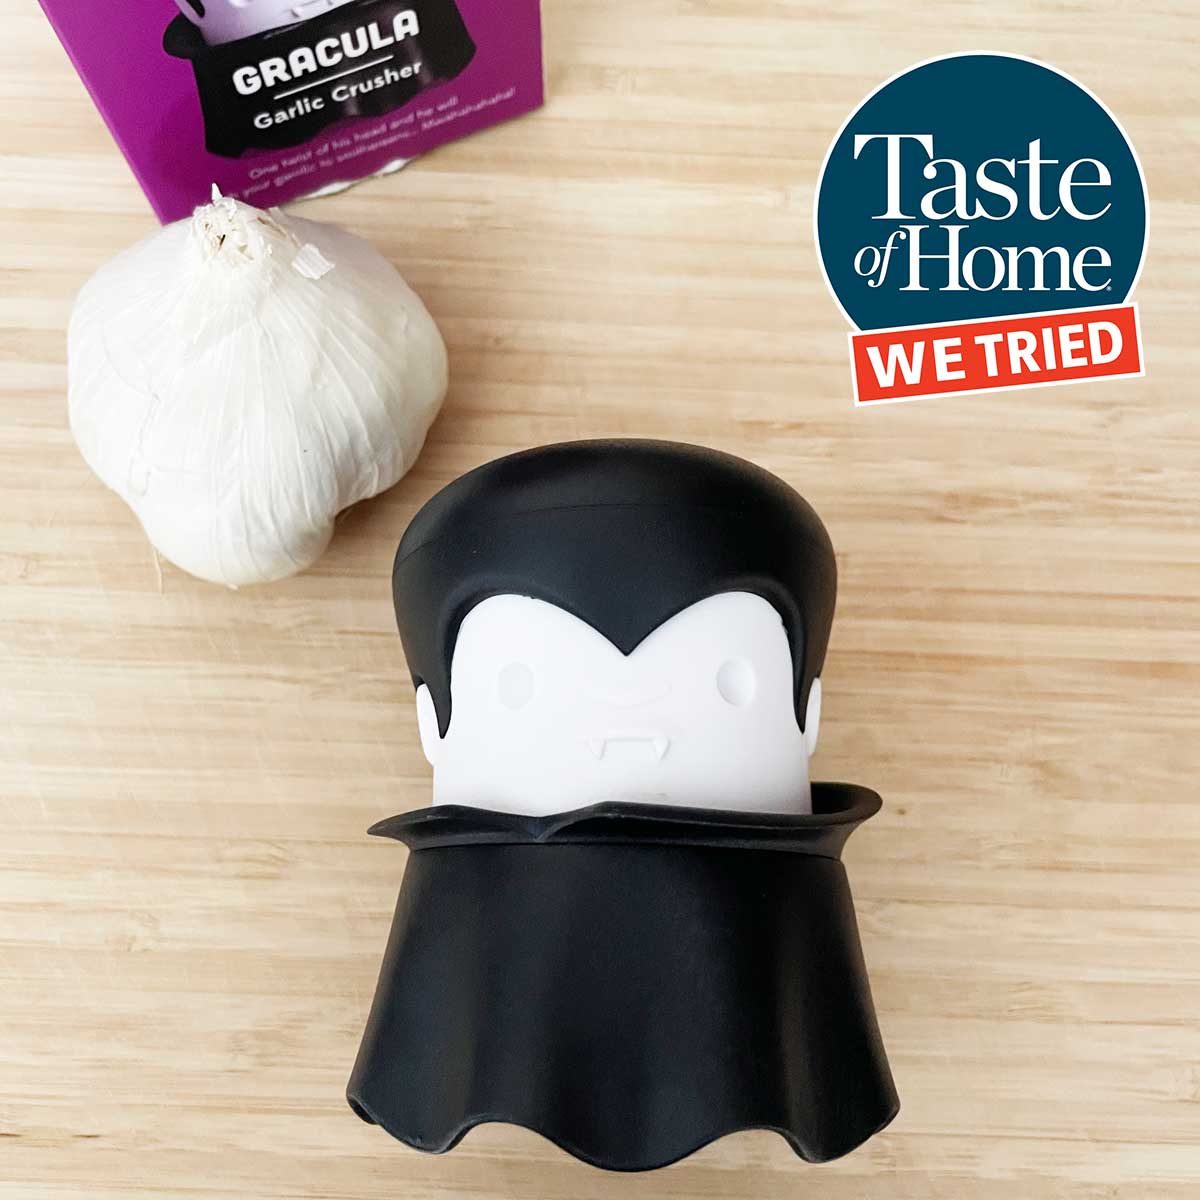 We're Obsessed with This Best-Selling Gracula Garlic Crusher